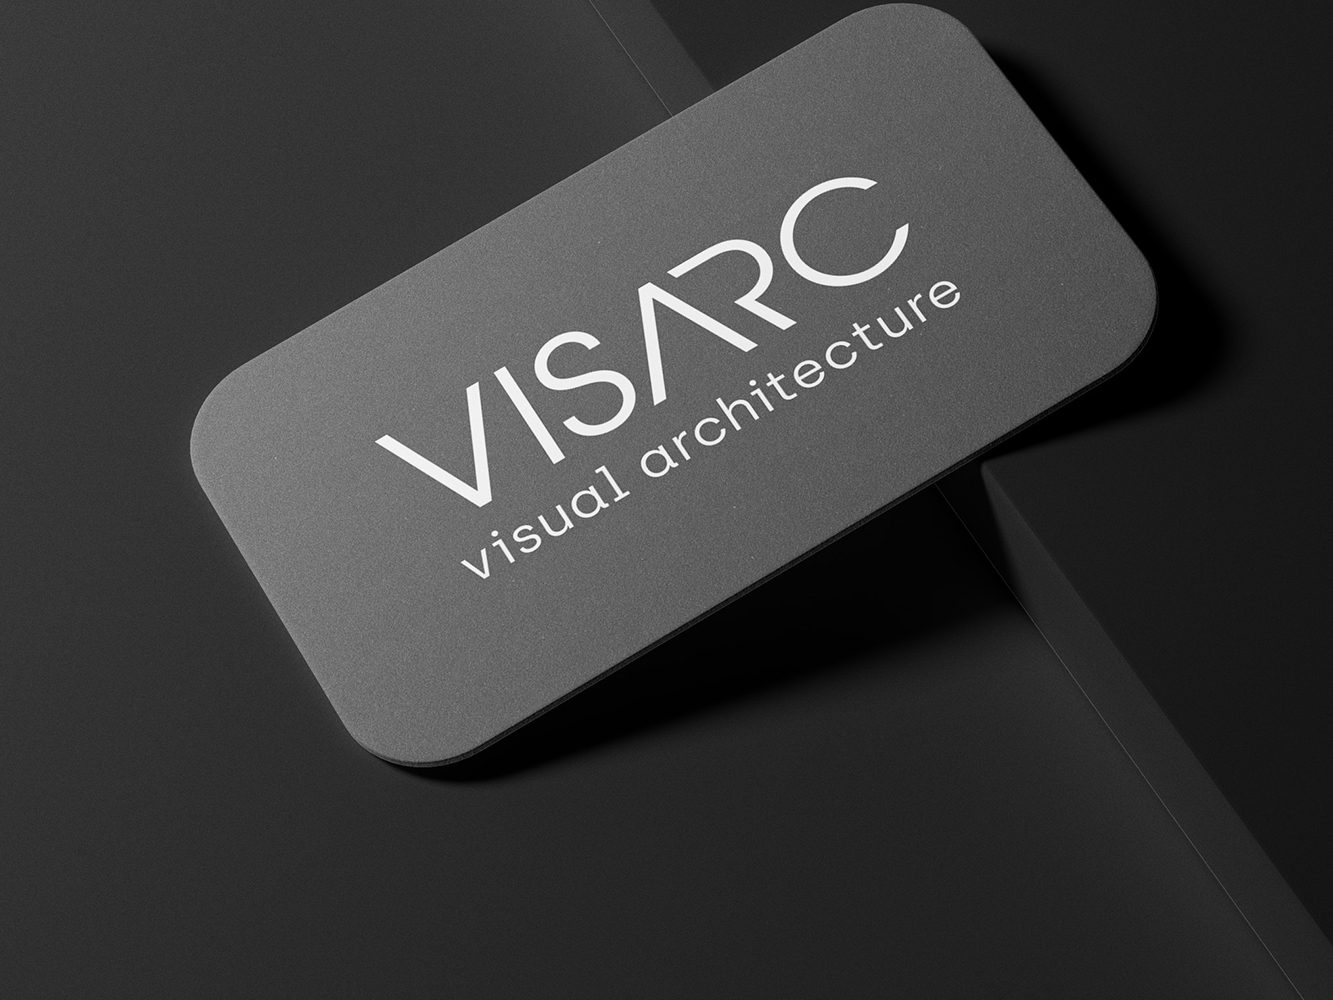 Visarc rebrand supports a renewed focus on long term vision